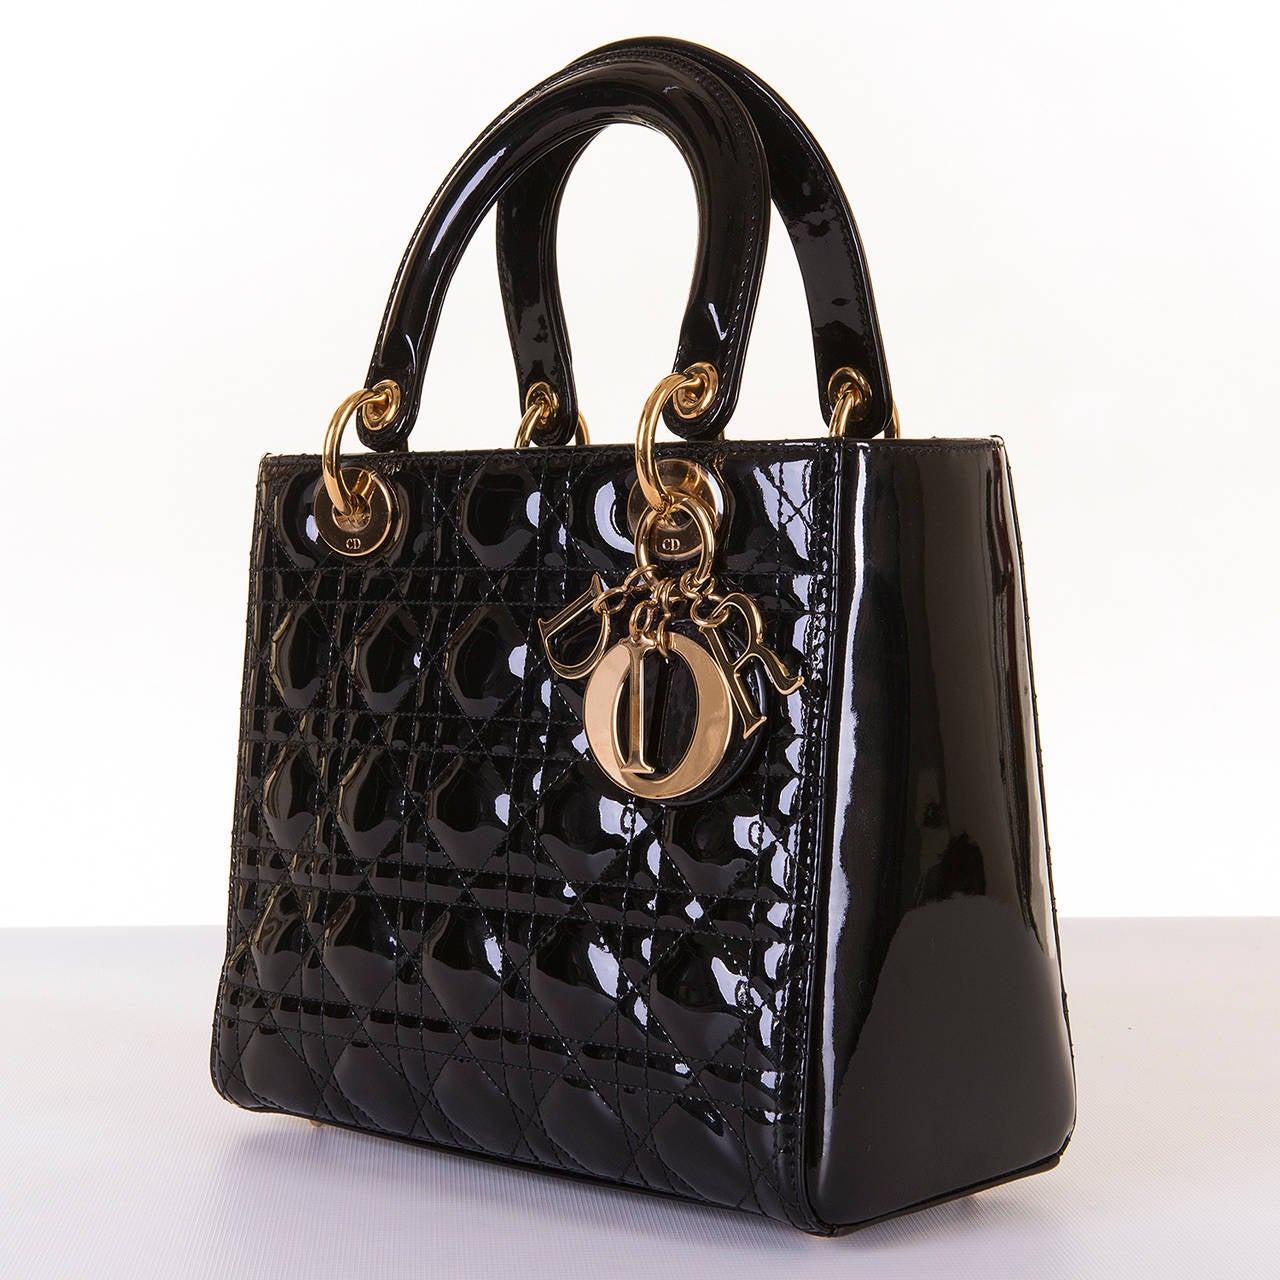 The much sought after medium size 'Lady Dior' handbag by Christian Dior, finished in Black quilted patent leather with gold tone hardware. This bag is in pristine 'new' condition and comes with it's Dior dust-sack.